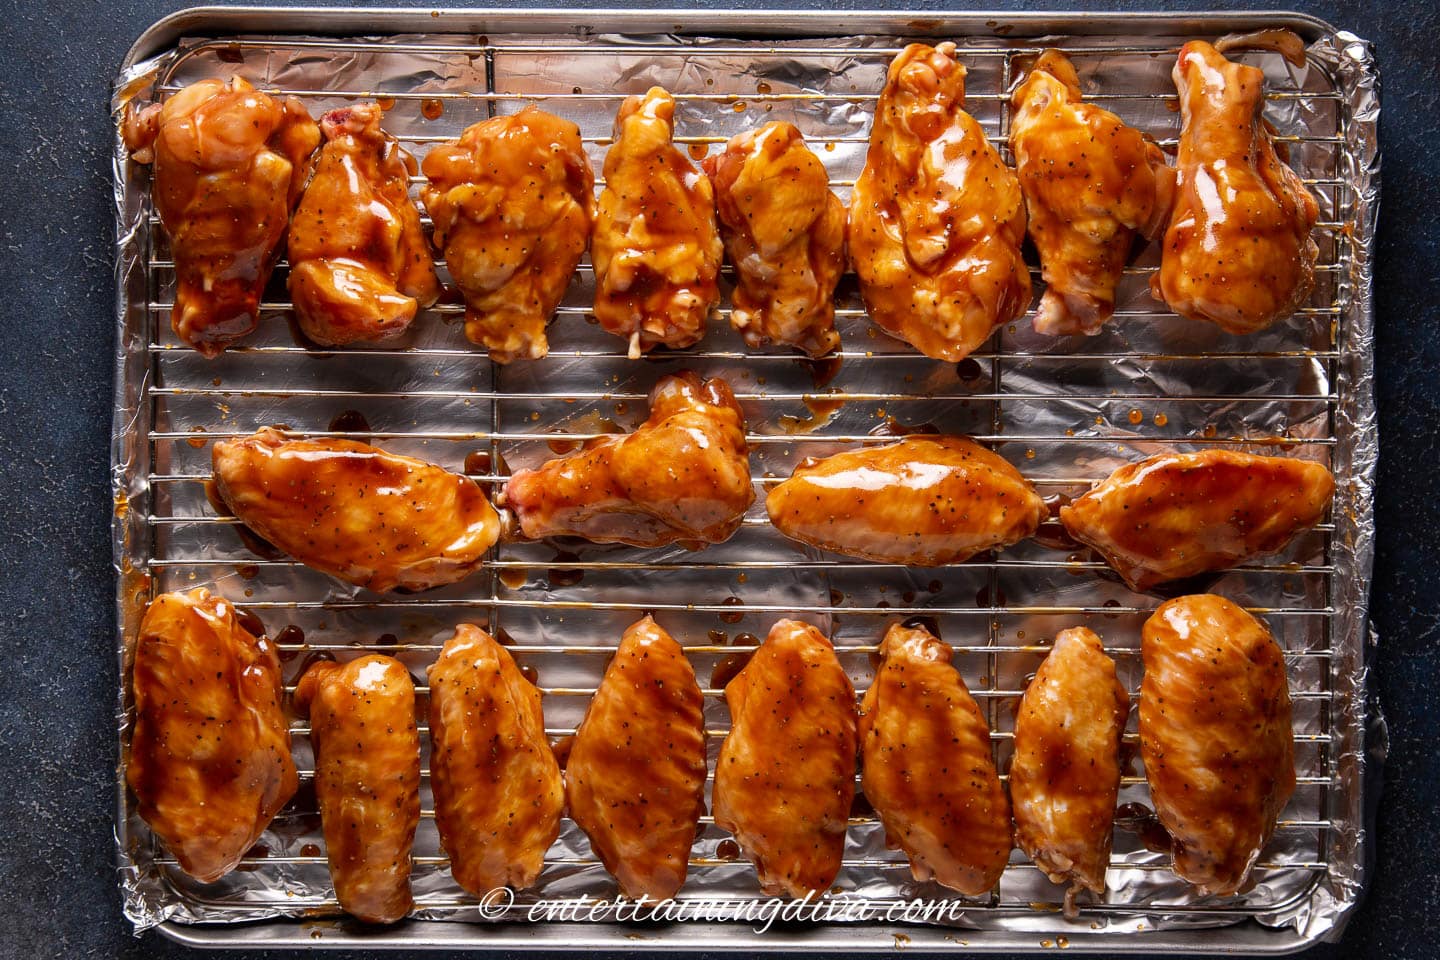 Chicken wings with oyster sauce on a baking sheet before cooking